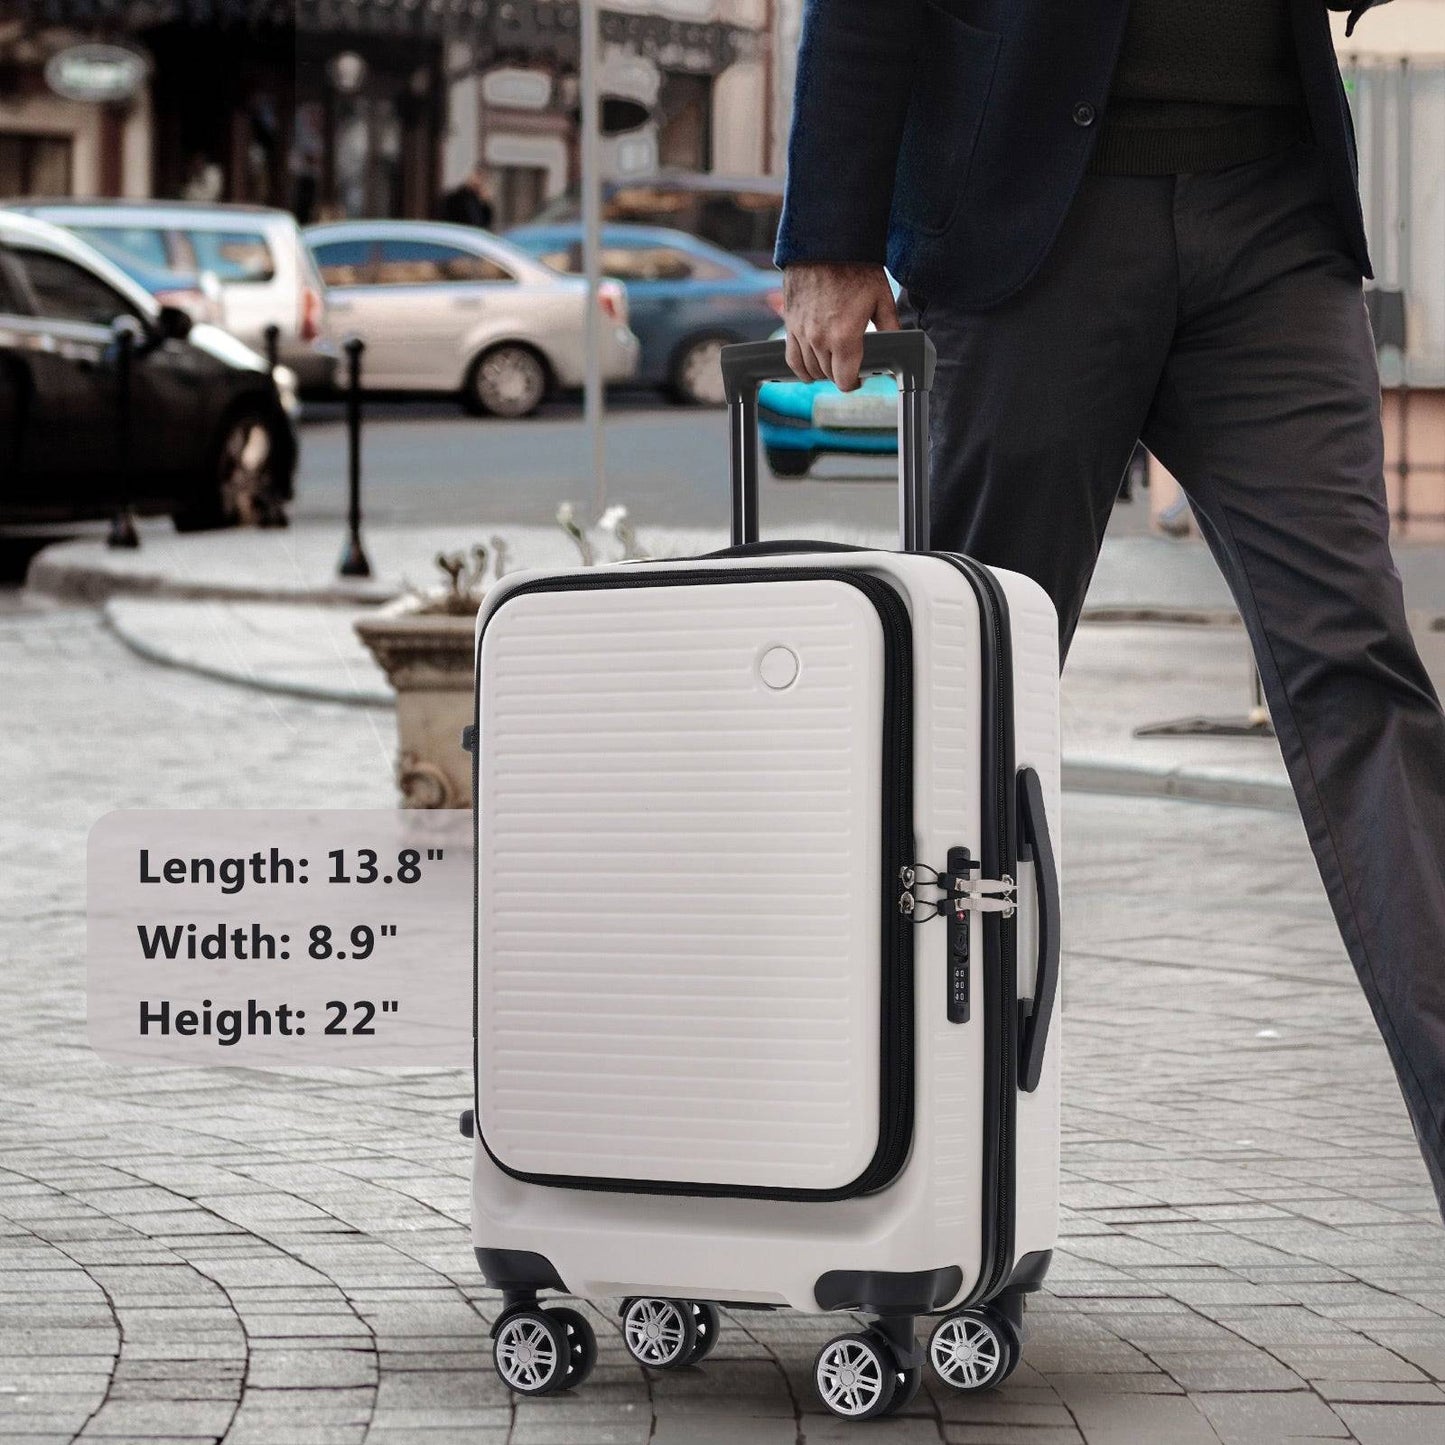 Carry-on Luggage 20 Inch Front Open Luggage Lightweight Suitcase with Front Pocket and USB Port, 1 Portable Carrying Case